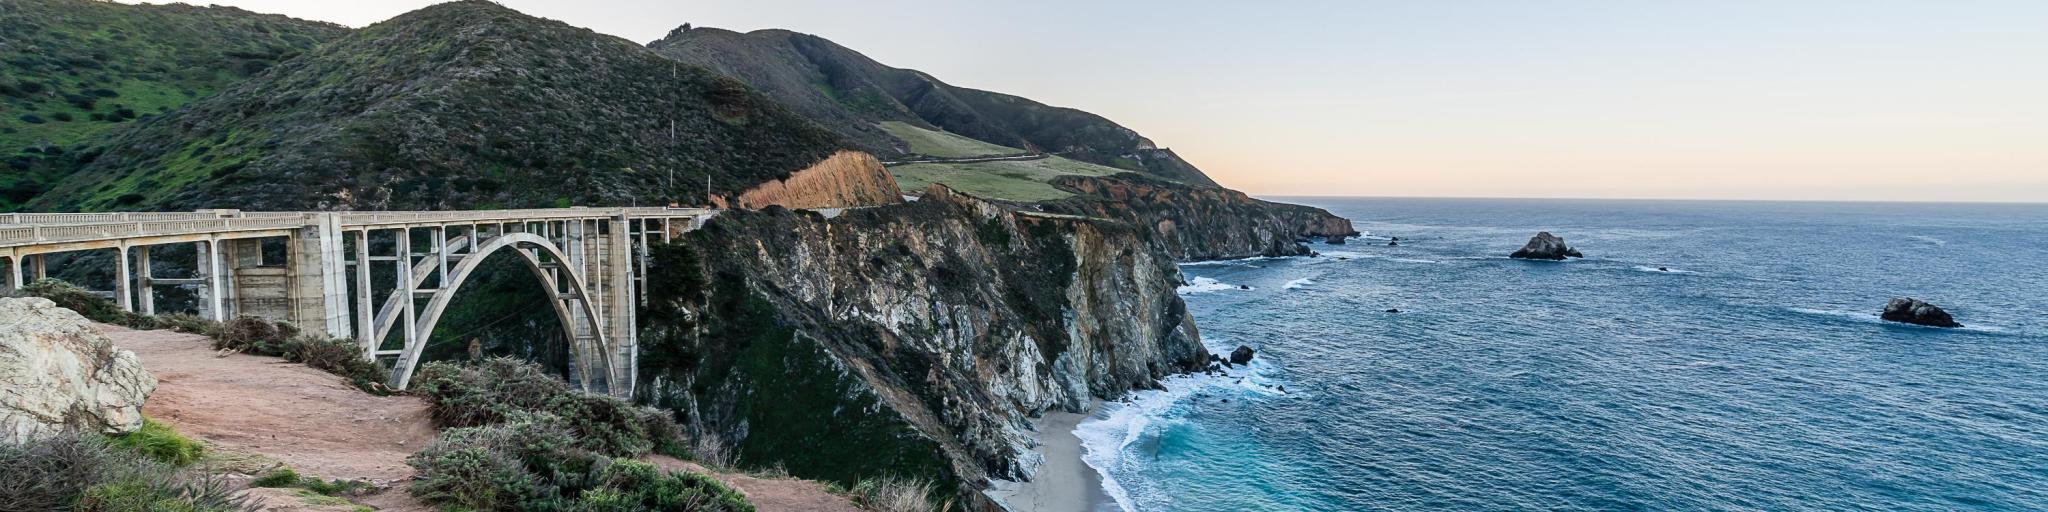 An Evening along the Majestic Pacific Coast Highway from Monterey to Big Sur